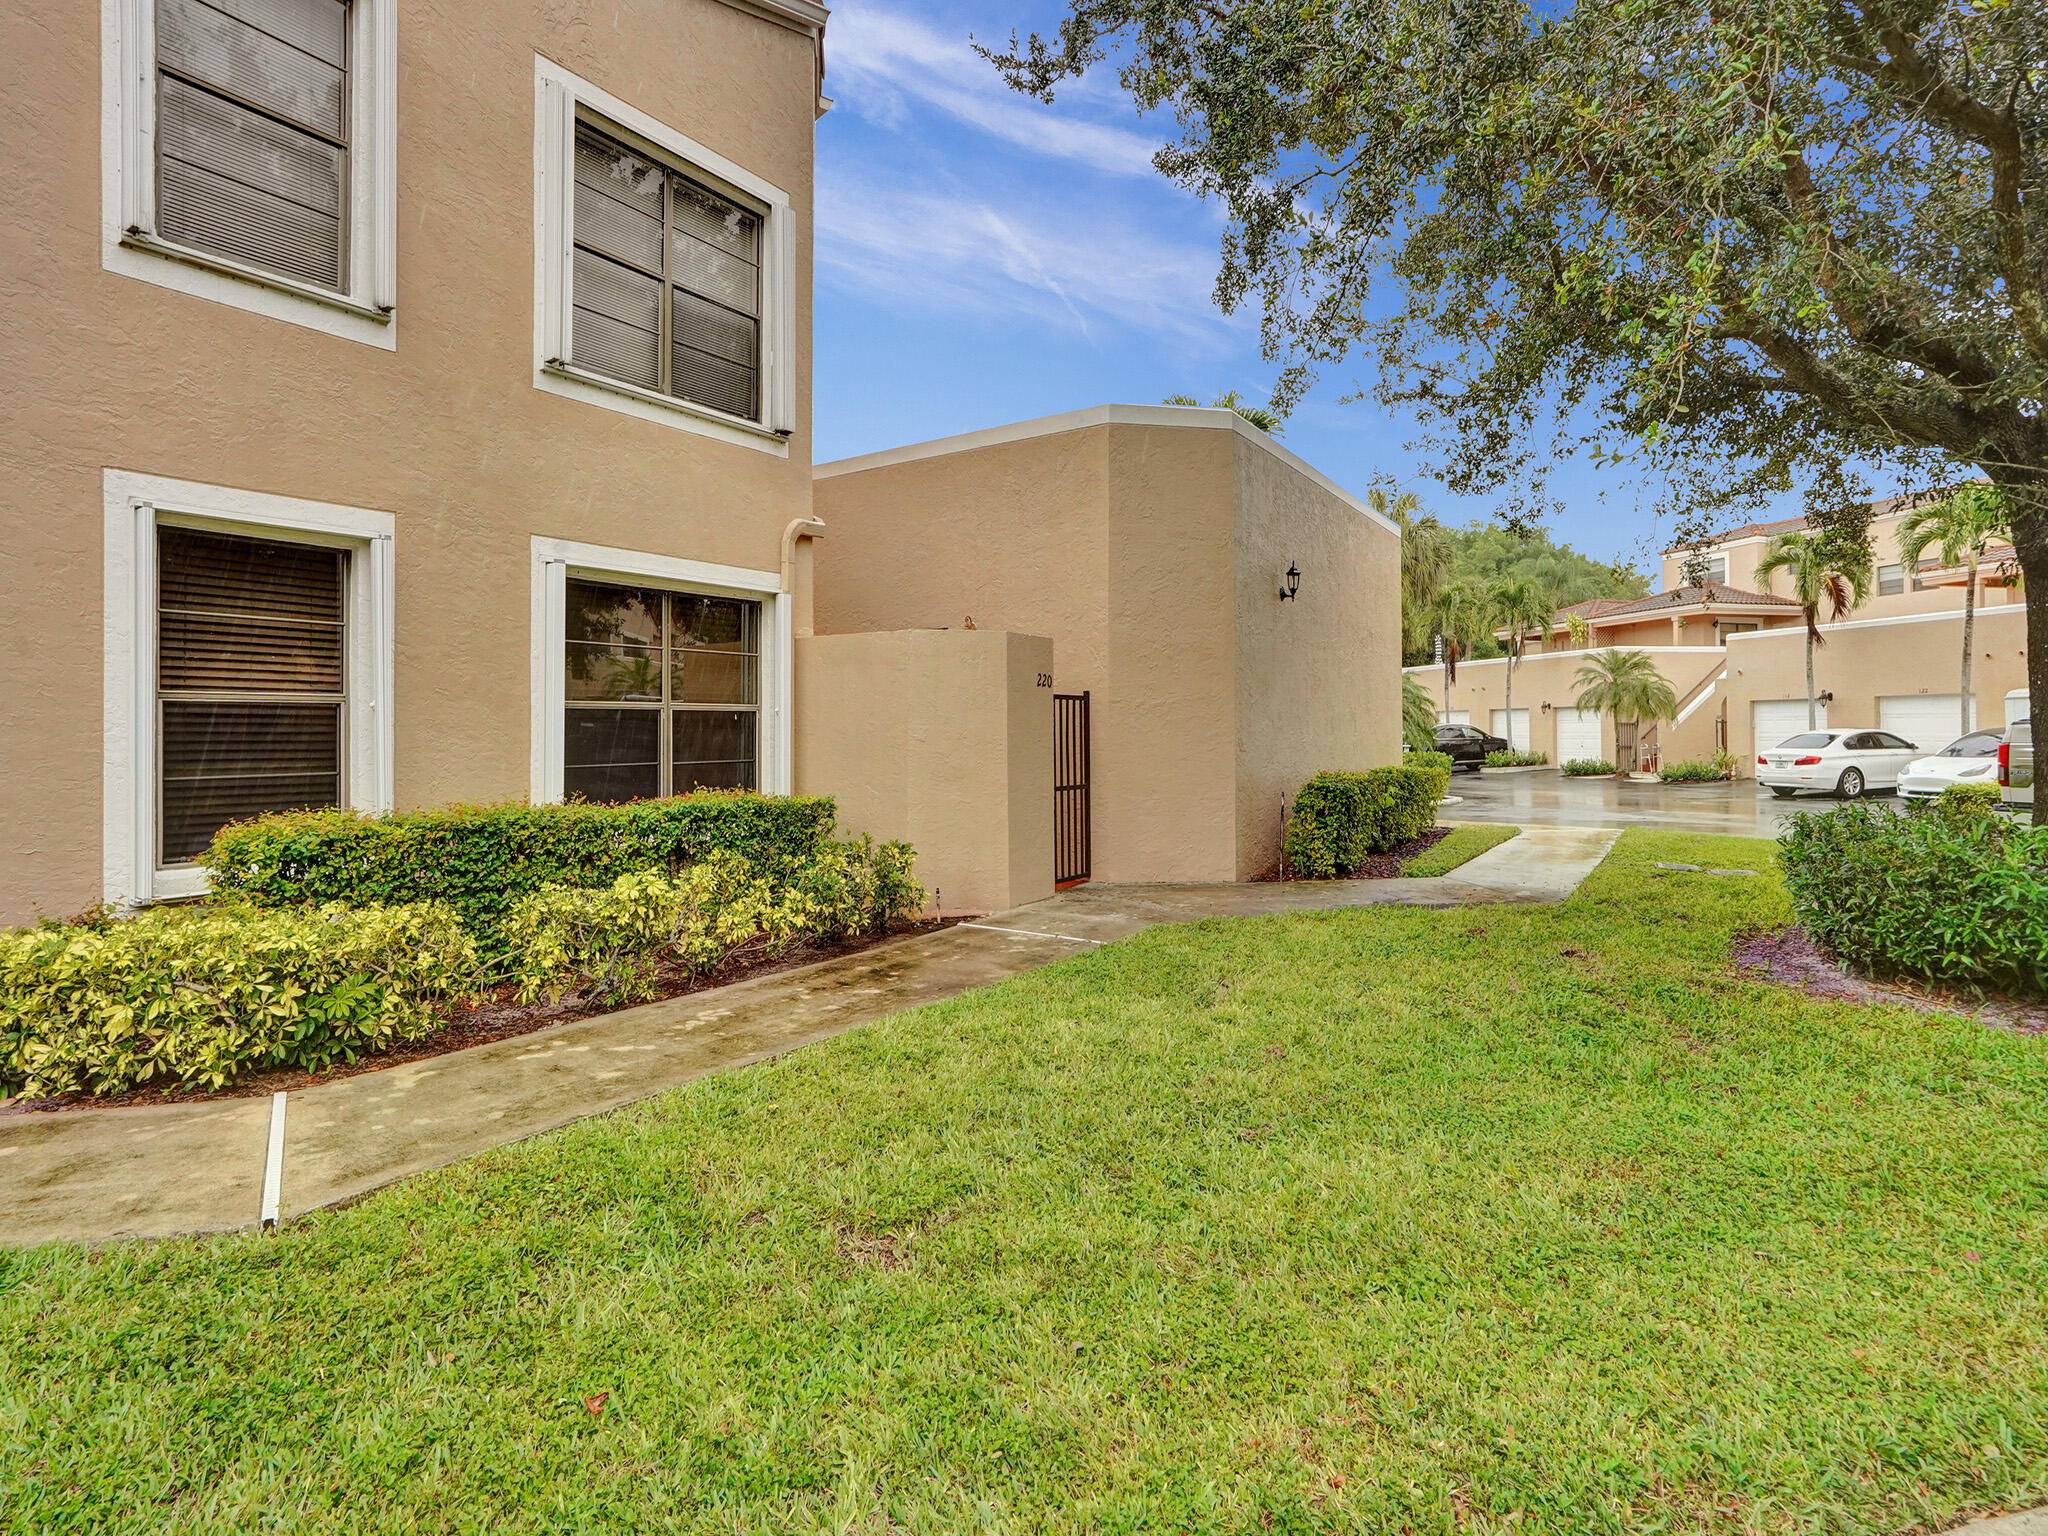 Pristine 3 bed 2 bath updated coach home style corner residence in Boca Raton's premier gated community of Boca Pointe in A RATED School District.